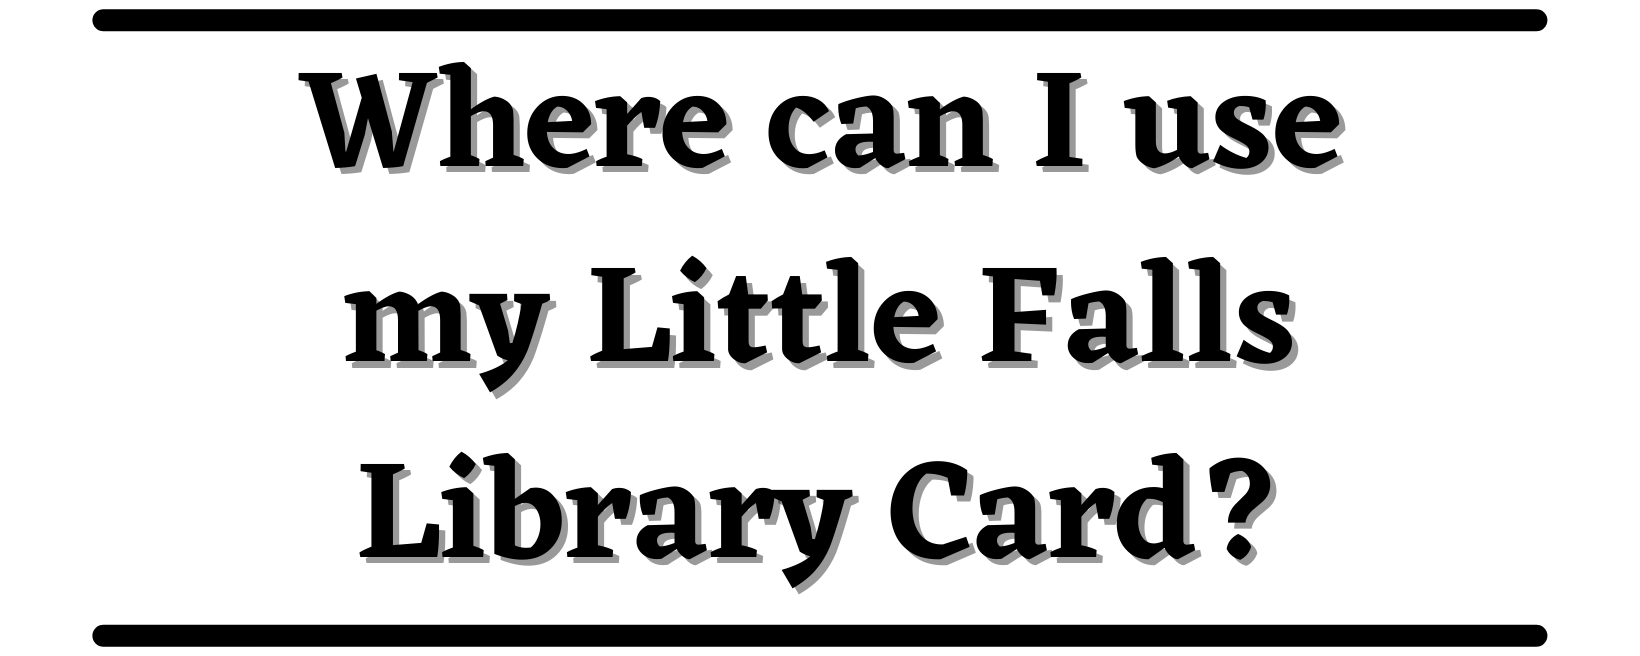 Where can I use my library card